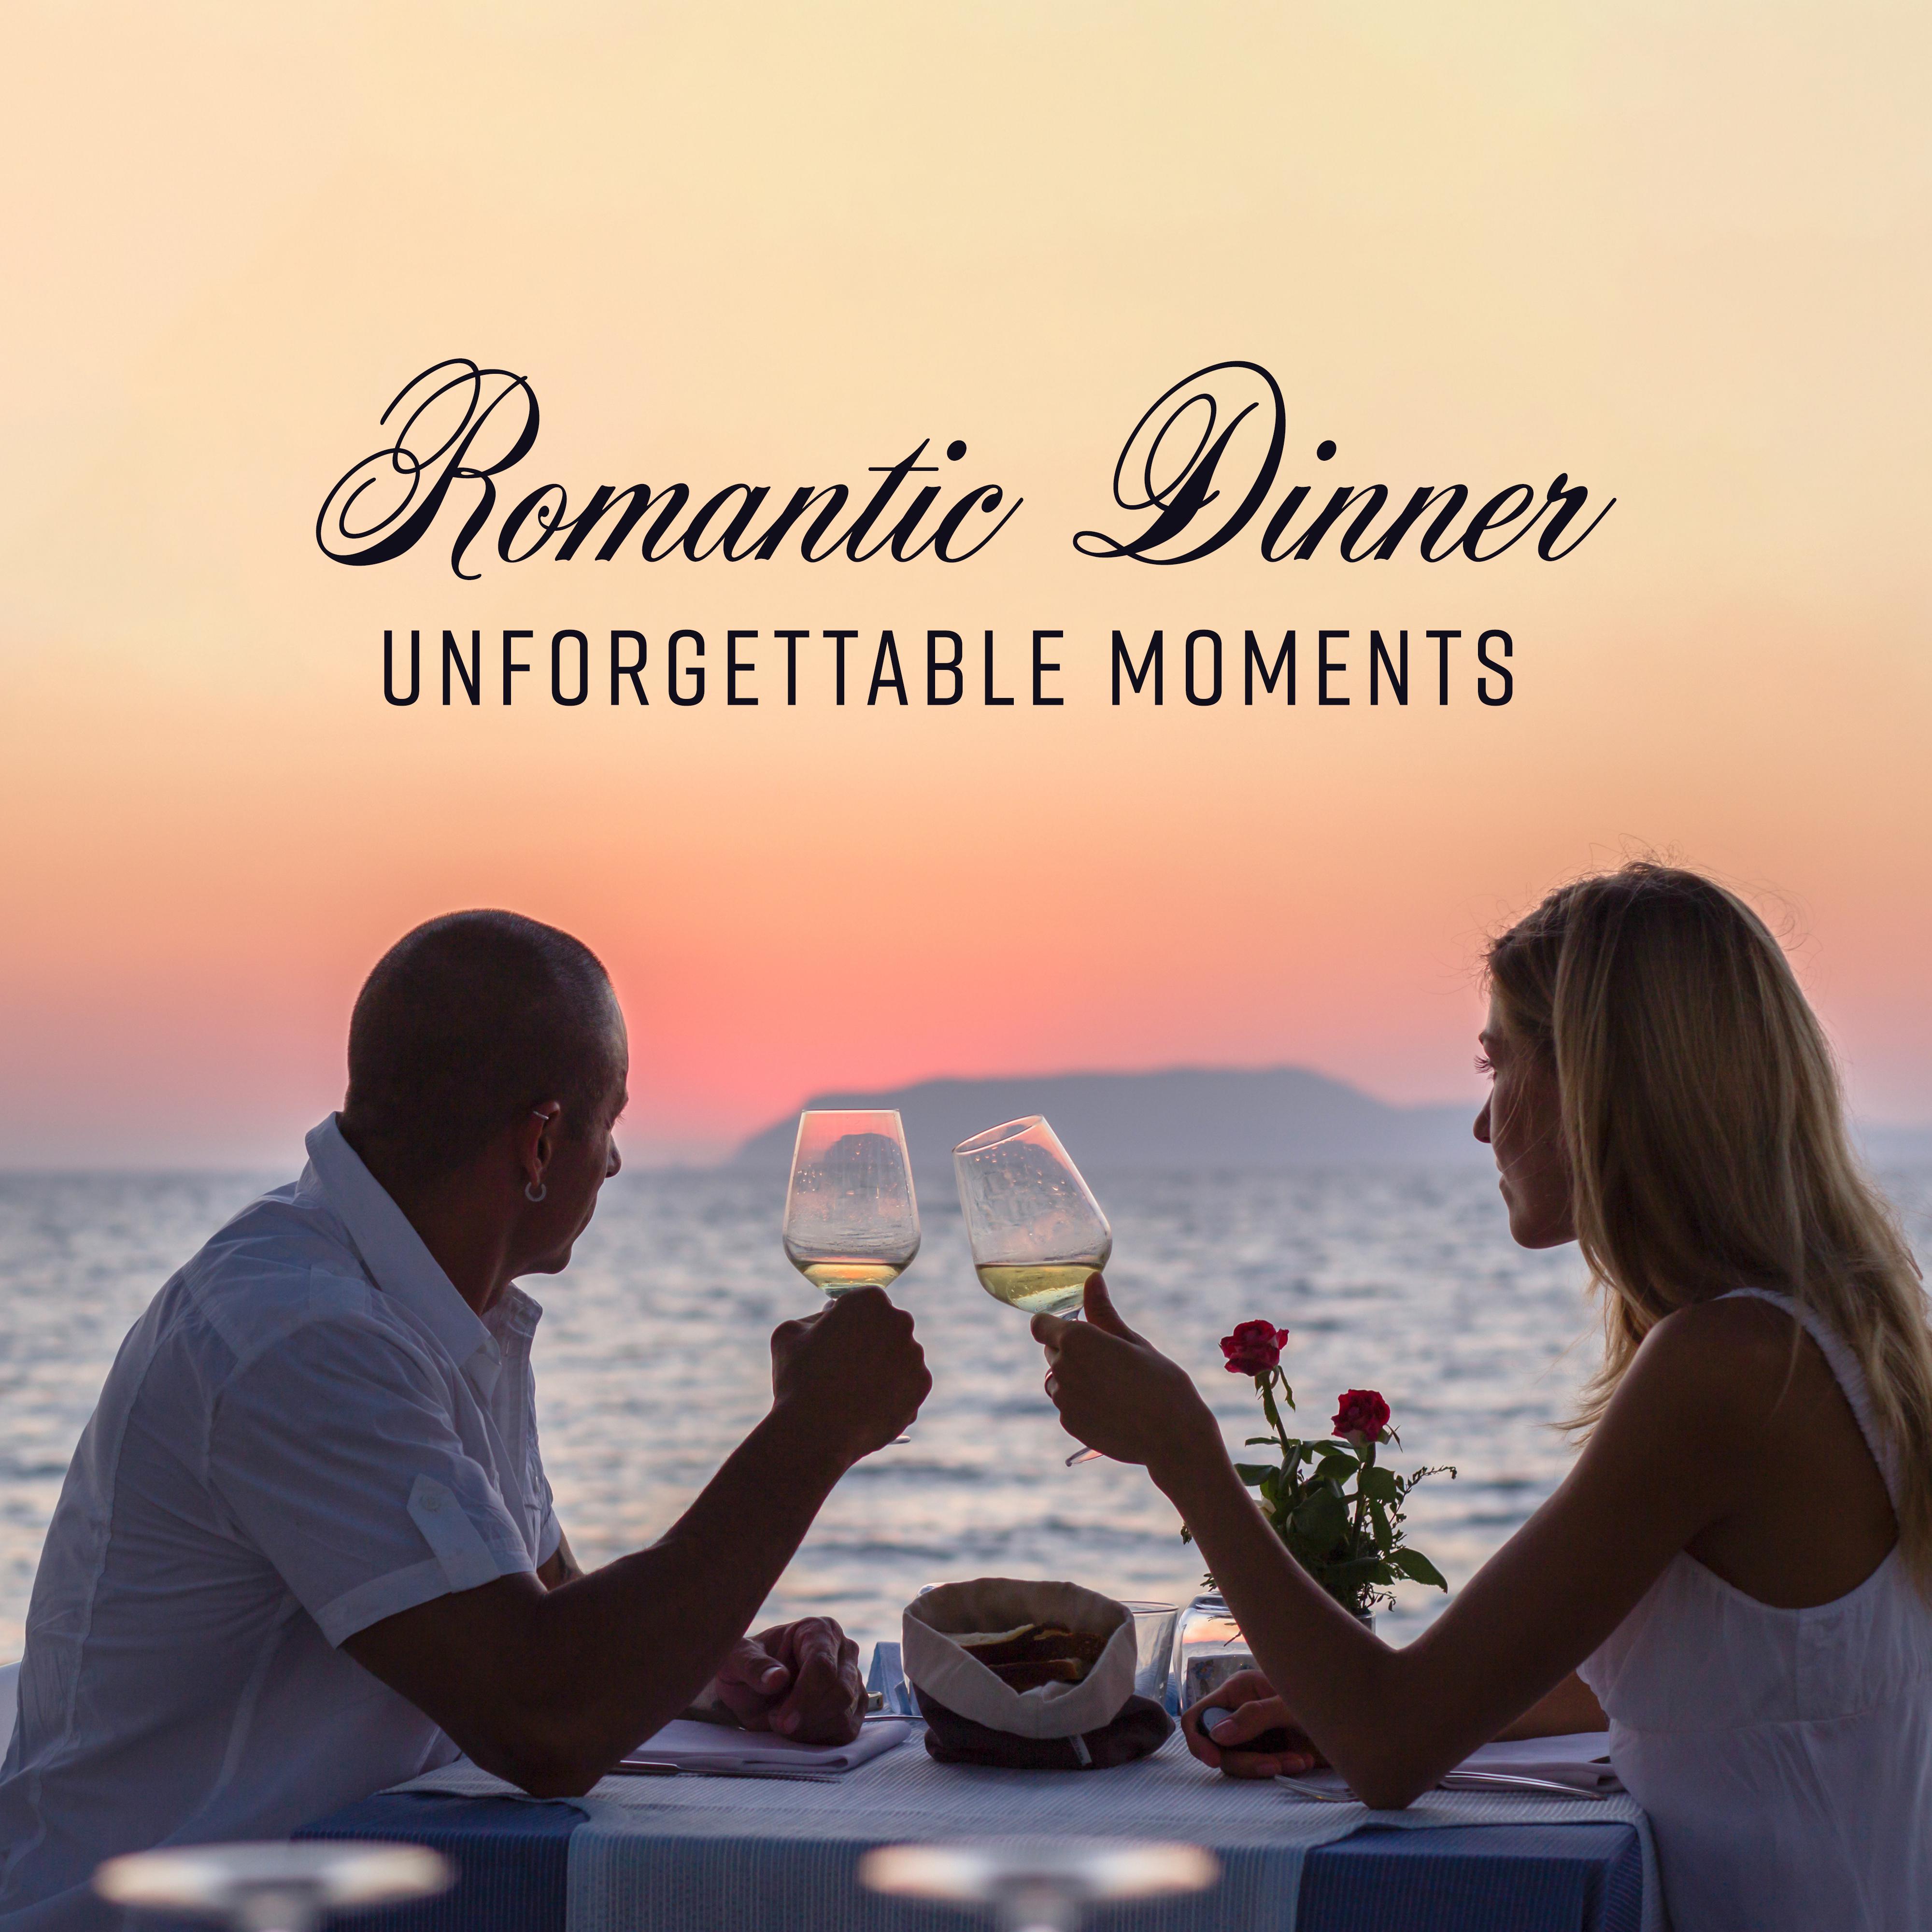 Romantic Dinner Unforgettable Moments: 2019 Piano Smooth Jazz Background Music for Happy Couple Moments in Restaurant